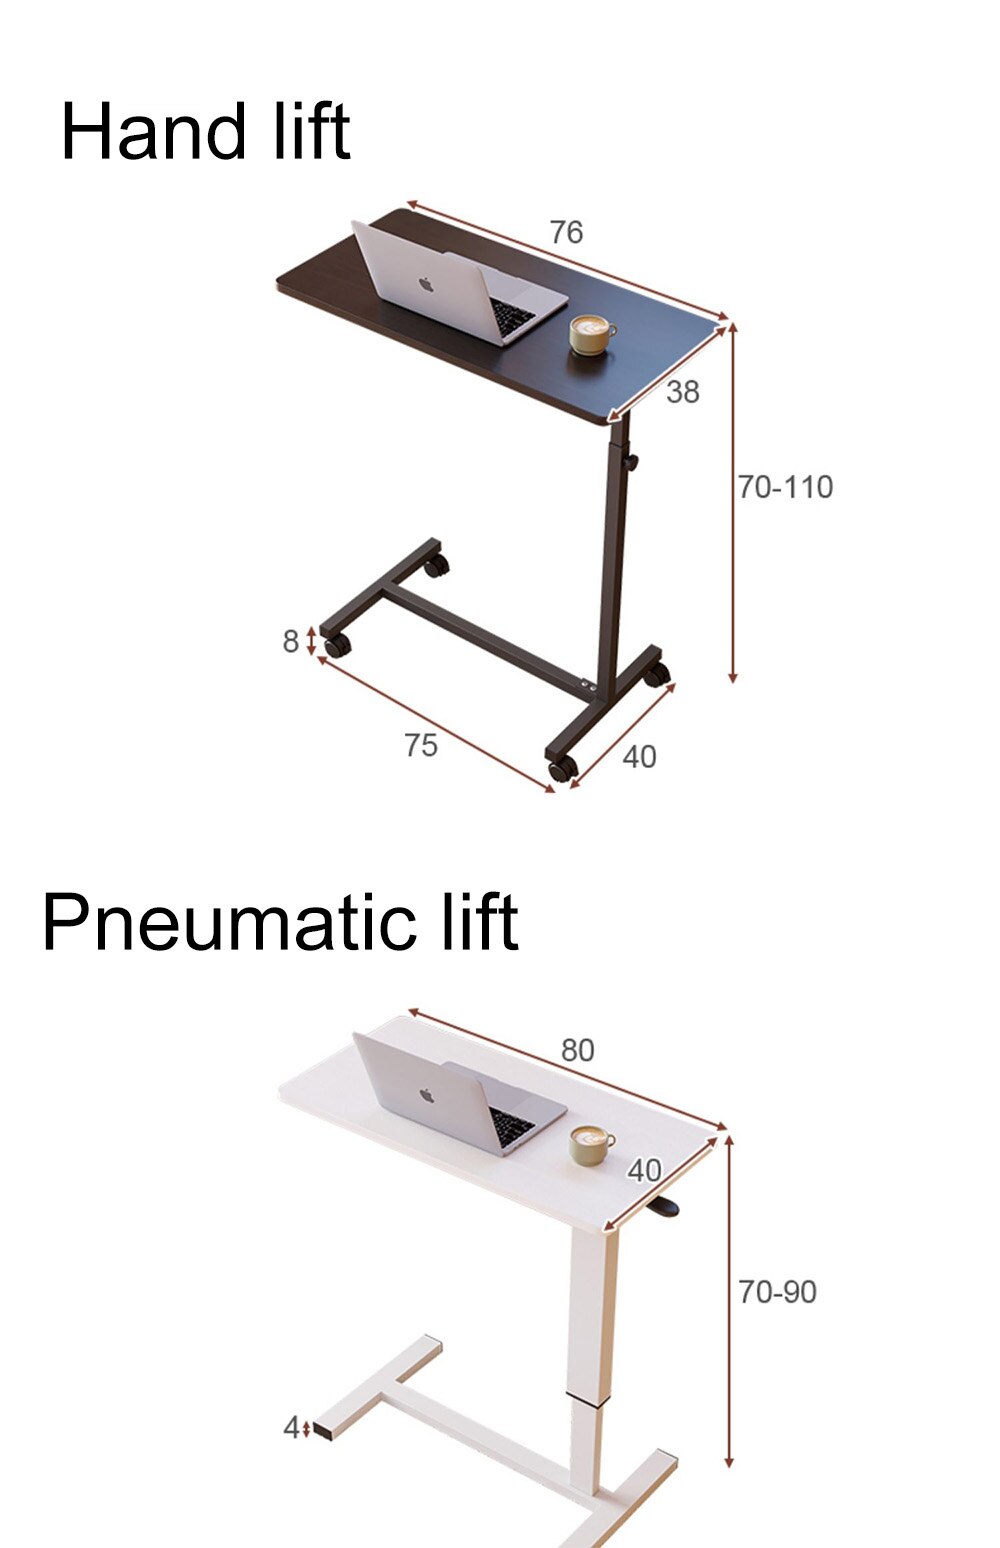 Movable Computer Table, Household Rotary Lazy Table Bedroom Pneumatic Lifting Removable Folding Home Student Workbench Portable